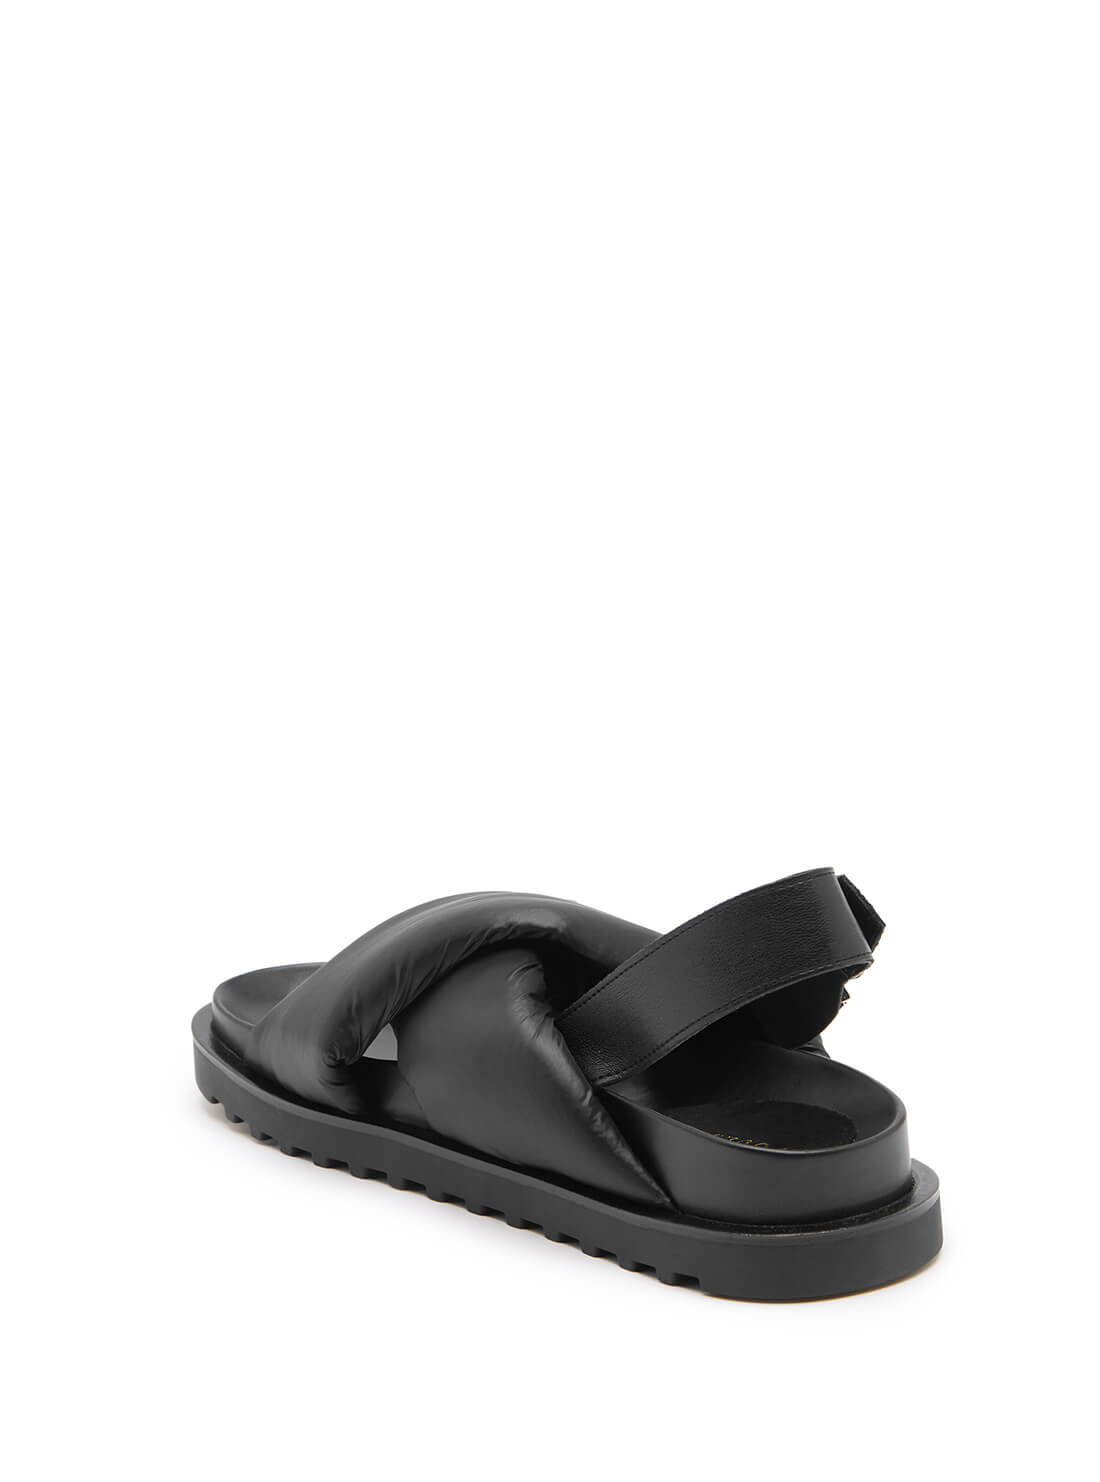 GUESS Womens Black Quilted Fabulus Flat Sandals FABULUS-A Back View